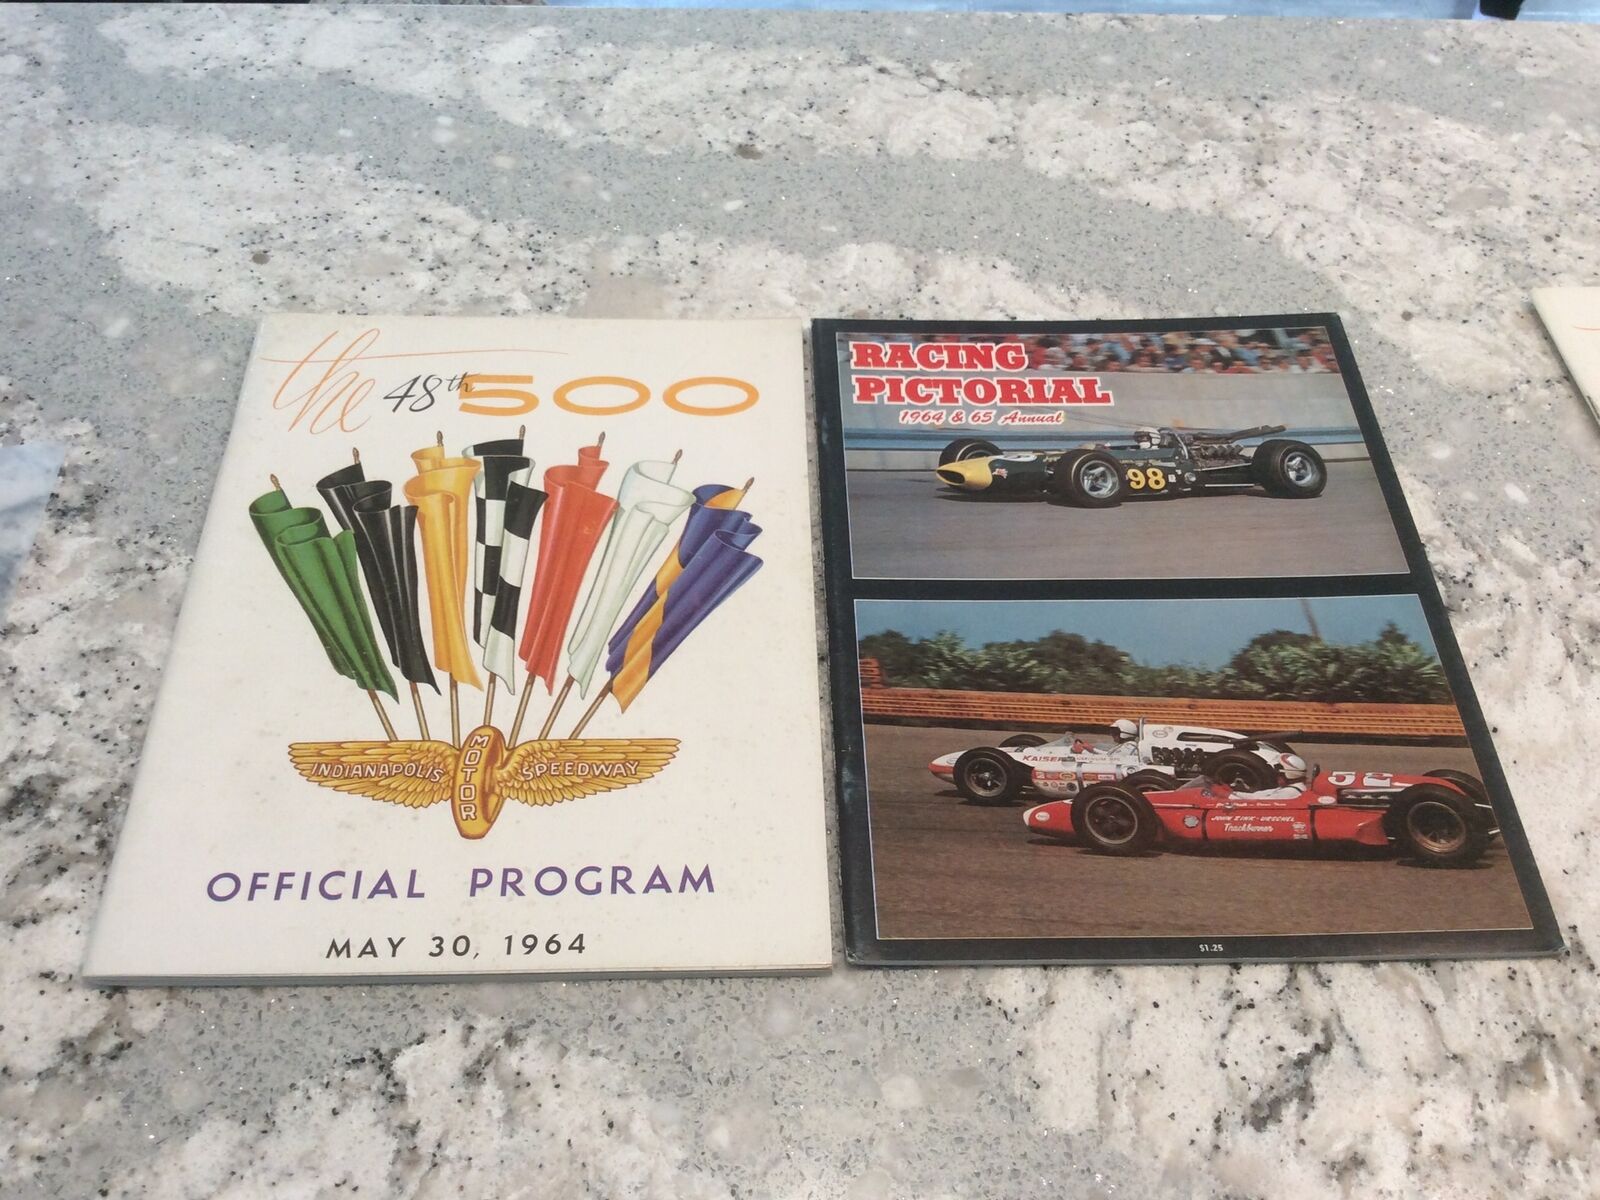 1964 Indianapolis 500 Race Program & 1964 & 65 Annual Racing Pictorial